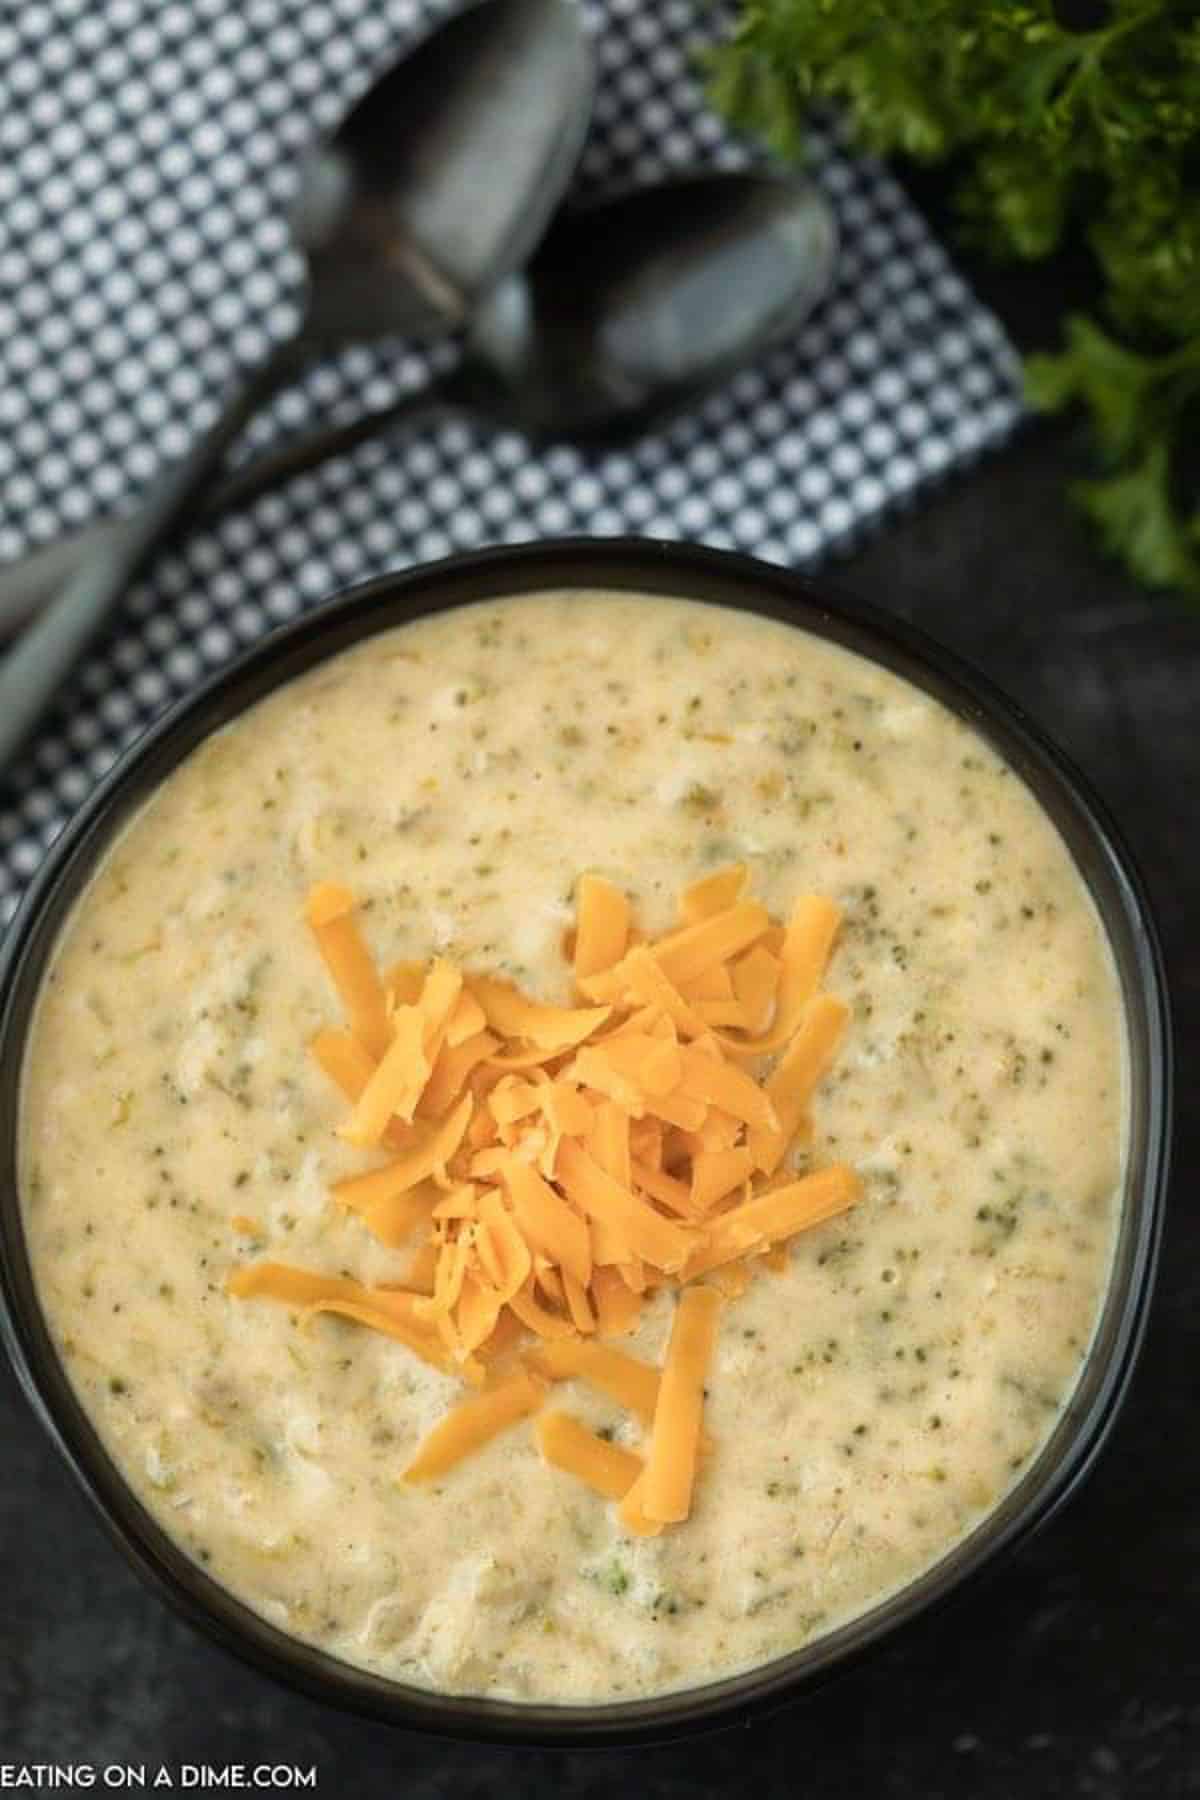 Crockpot Broccoli Cheese Soup in bowl.